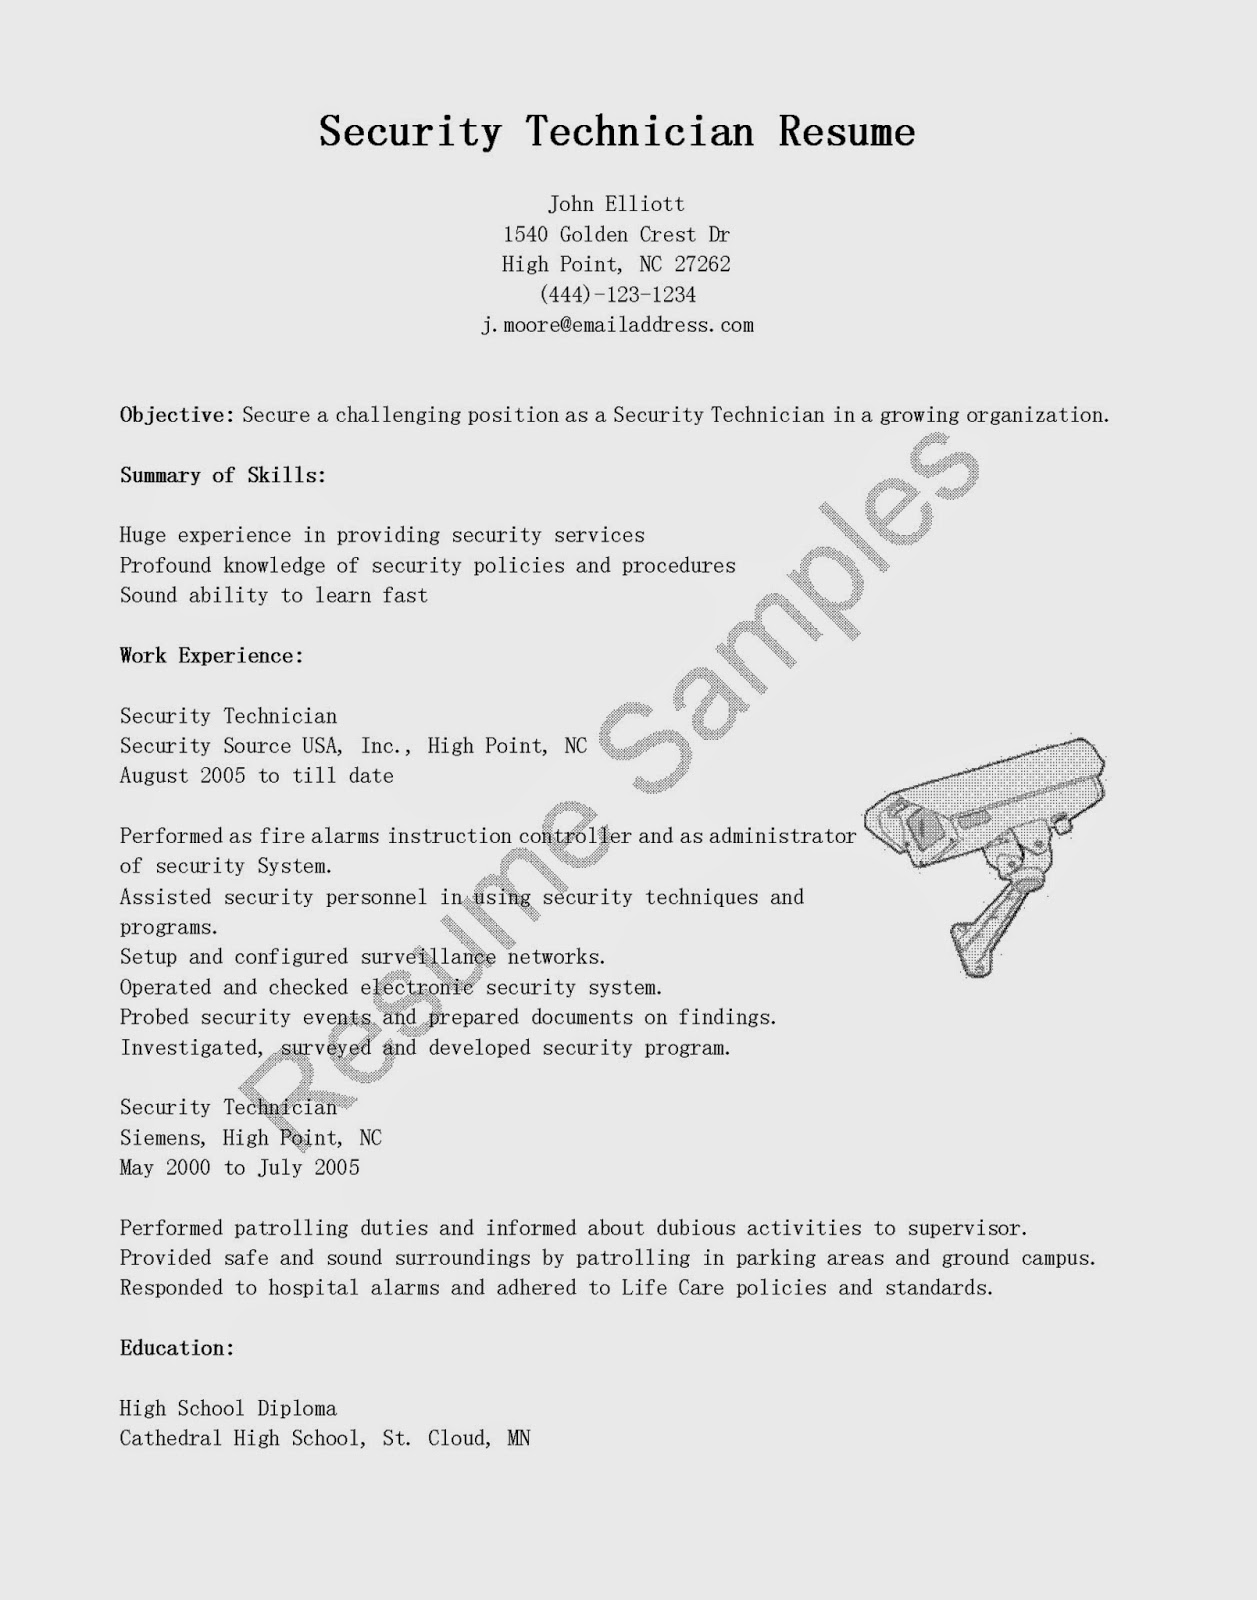 Sample resume for security system technician